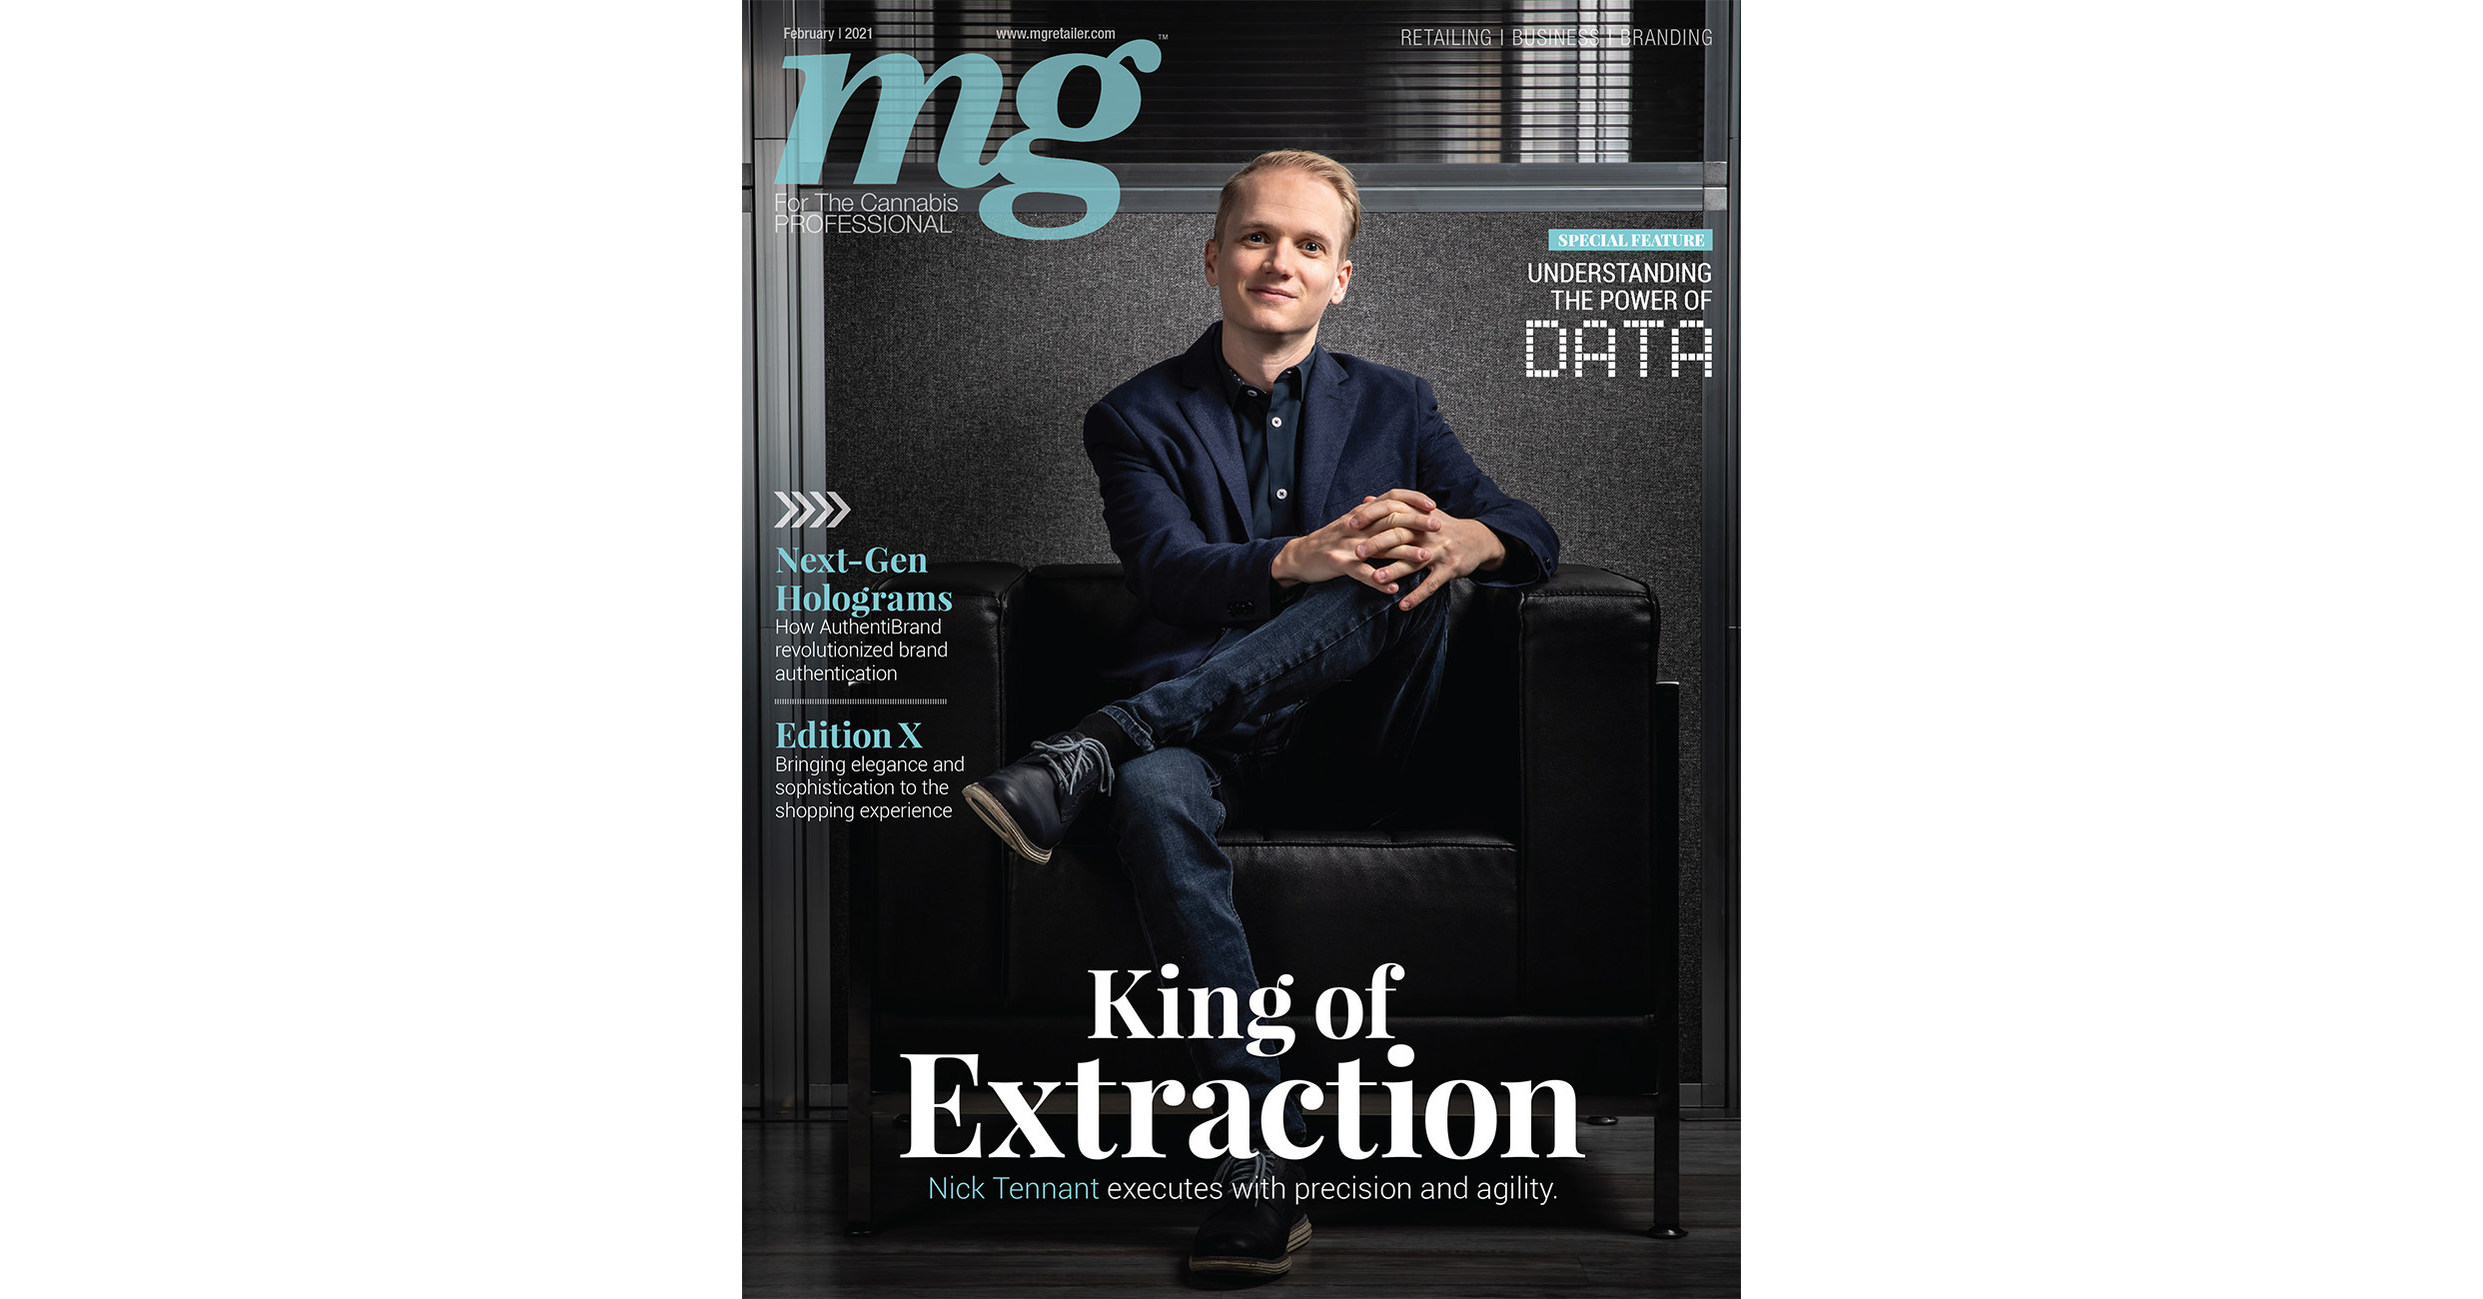 Leading Cannabis Trade Magazine Introduces Nick Tennant, Precision Extraction Co-Founder